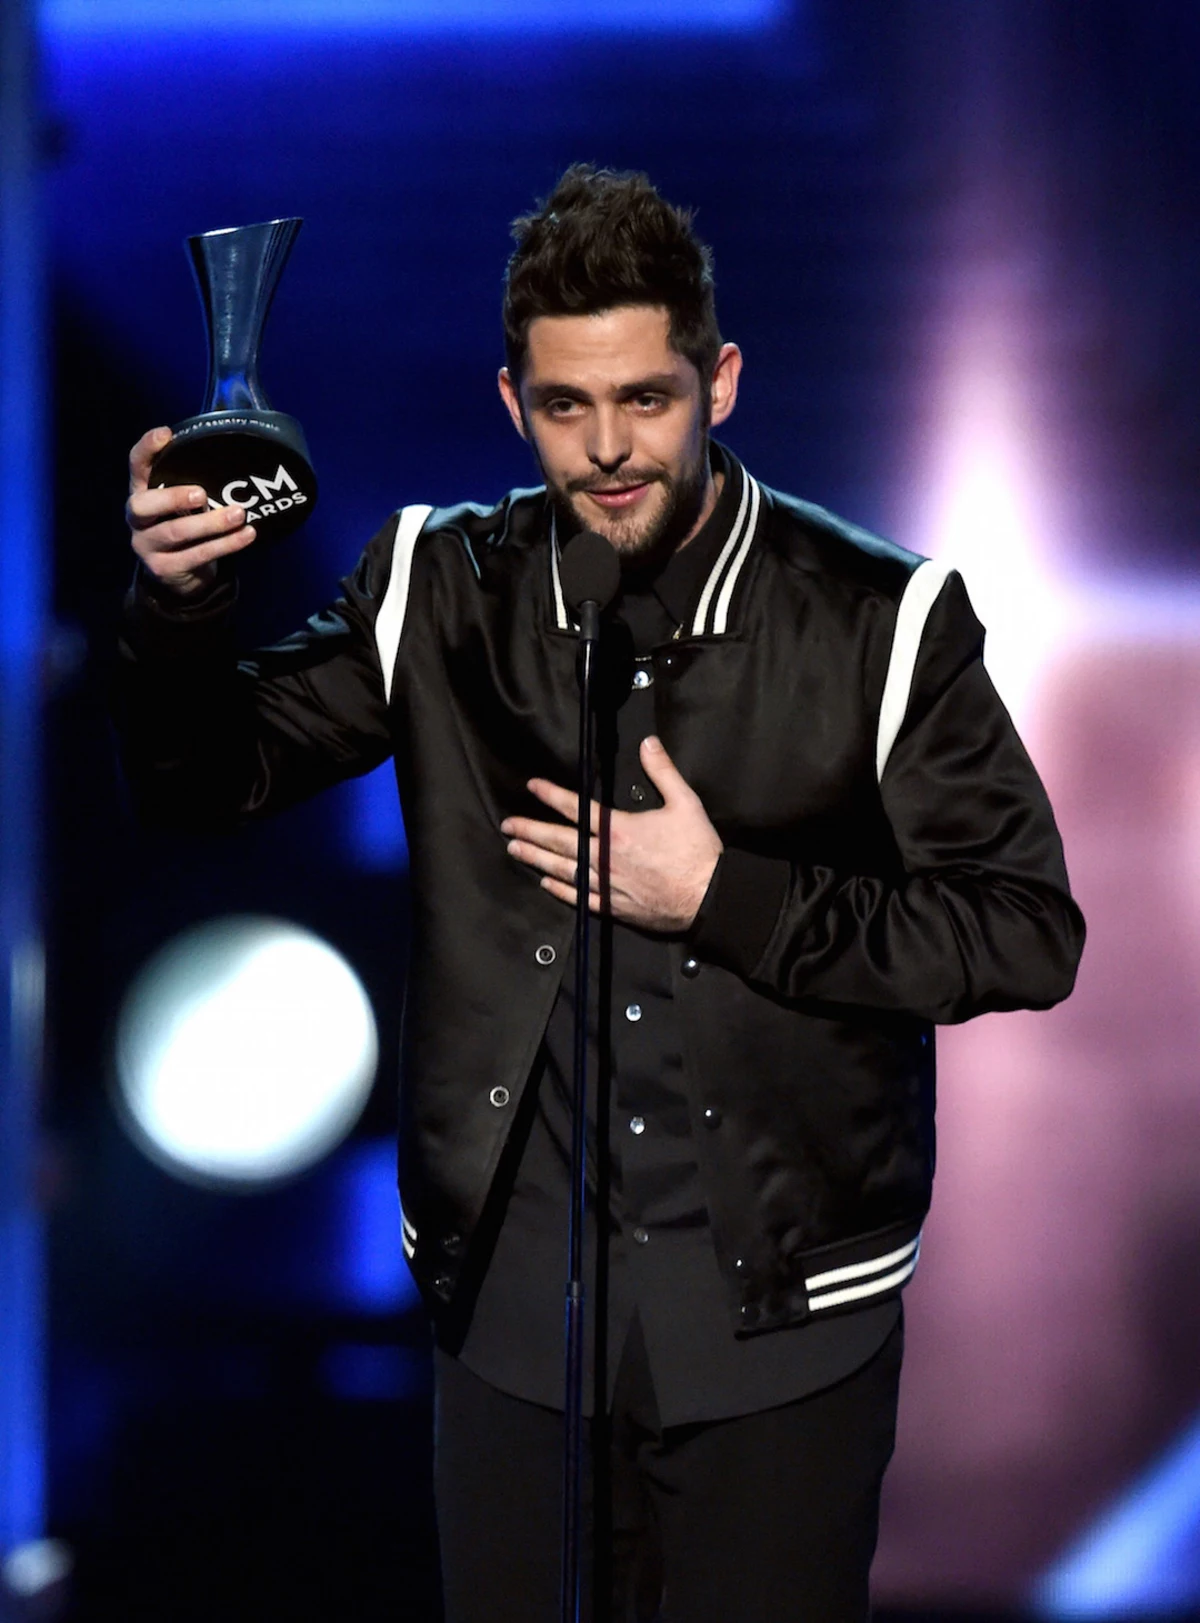 Thomas Rhett Takes Home Male Vocalist of the Year at the 2017 ACM Awards